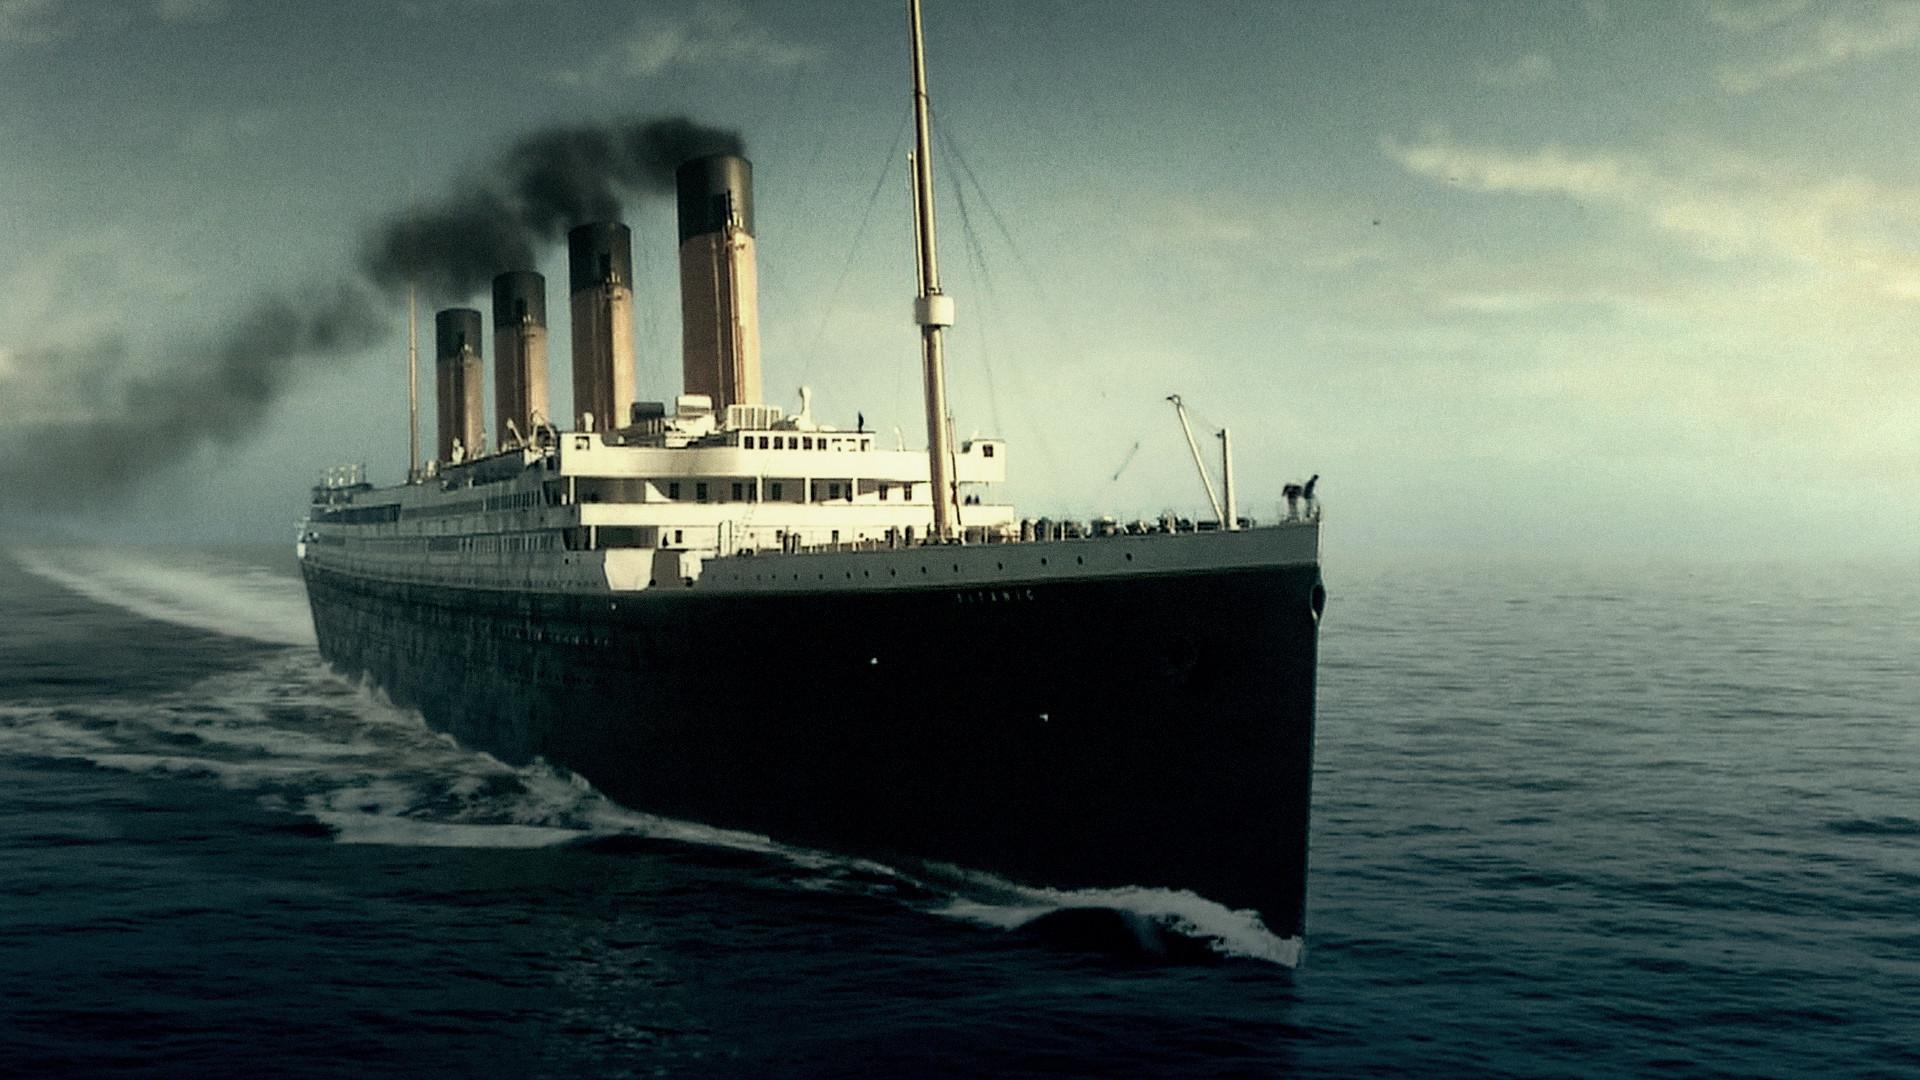 100th anniversary of the sinking of R.M.S. Titanic 15th April